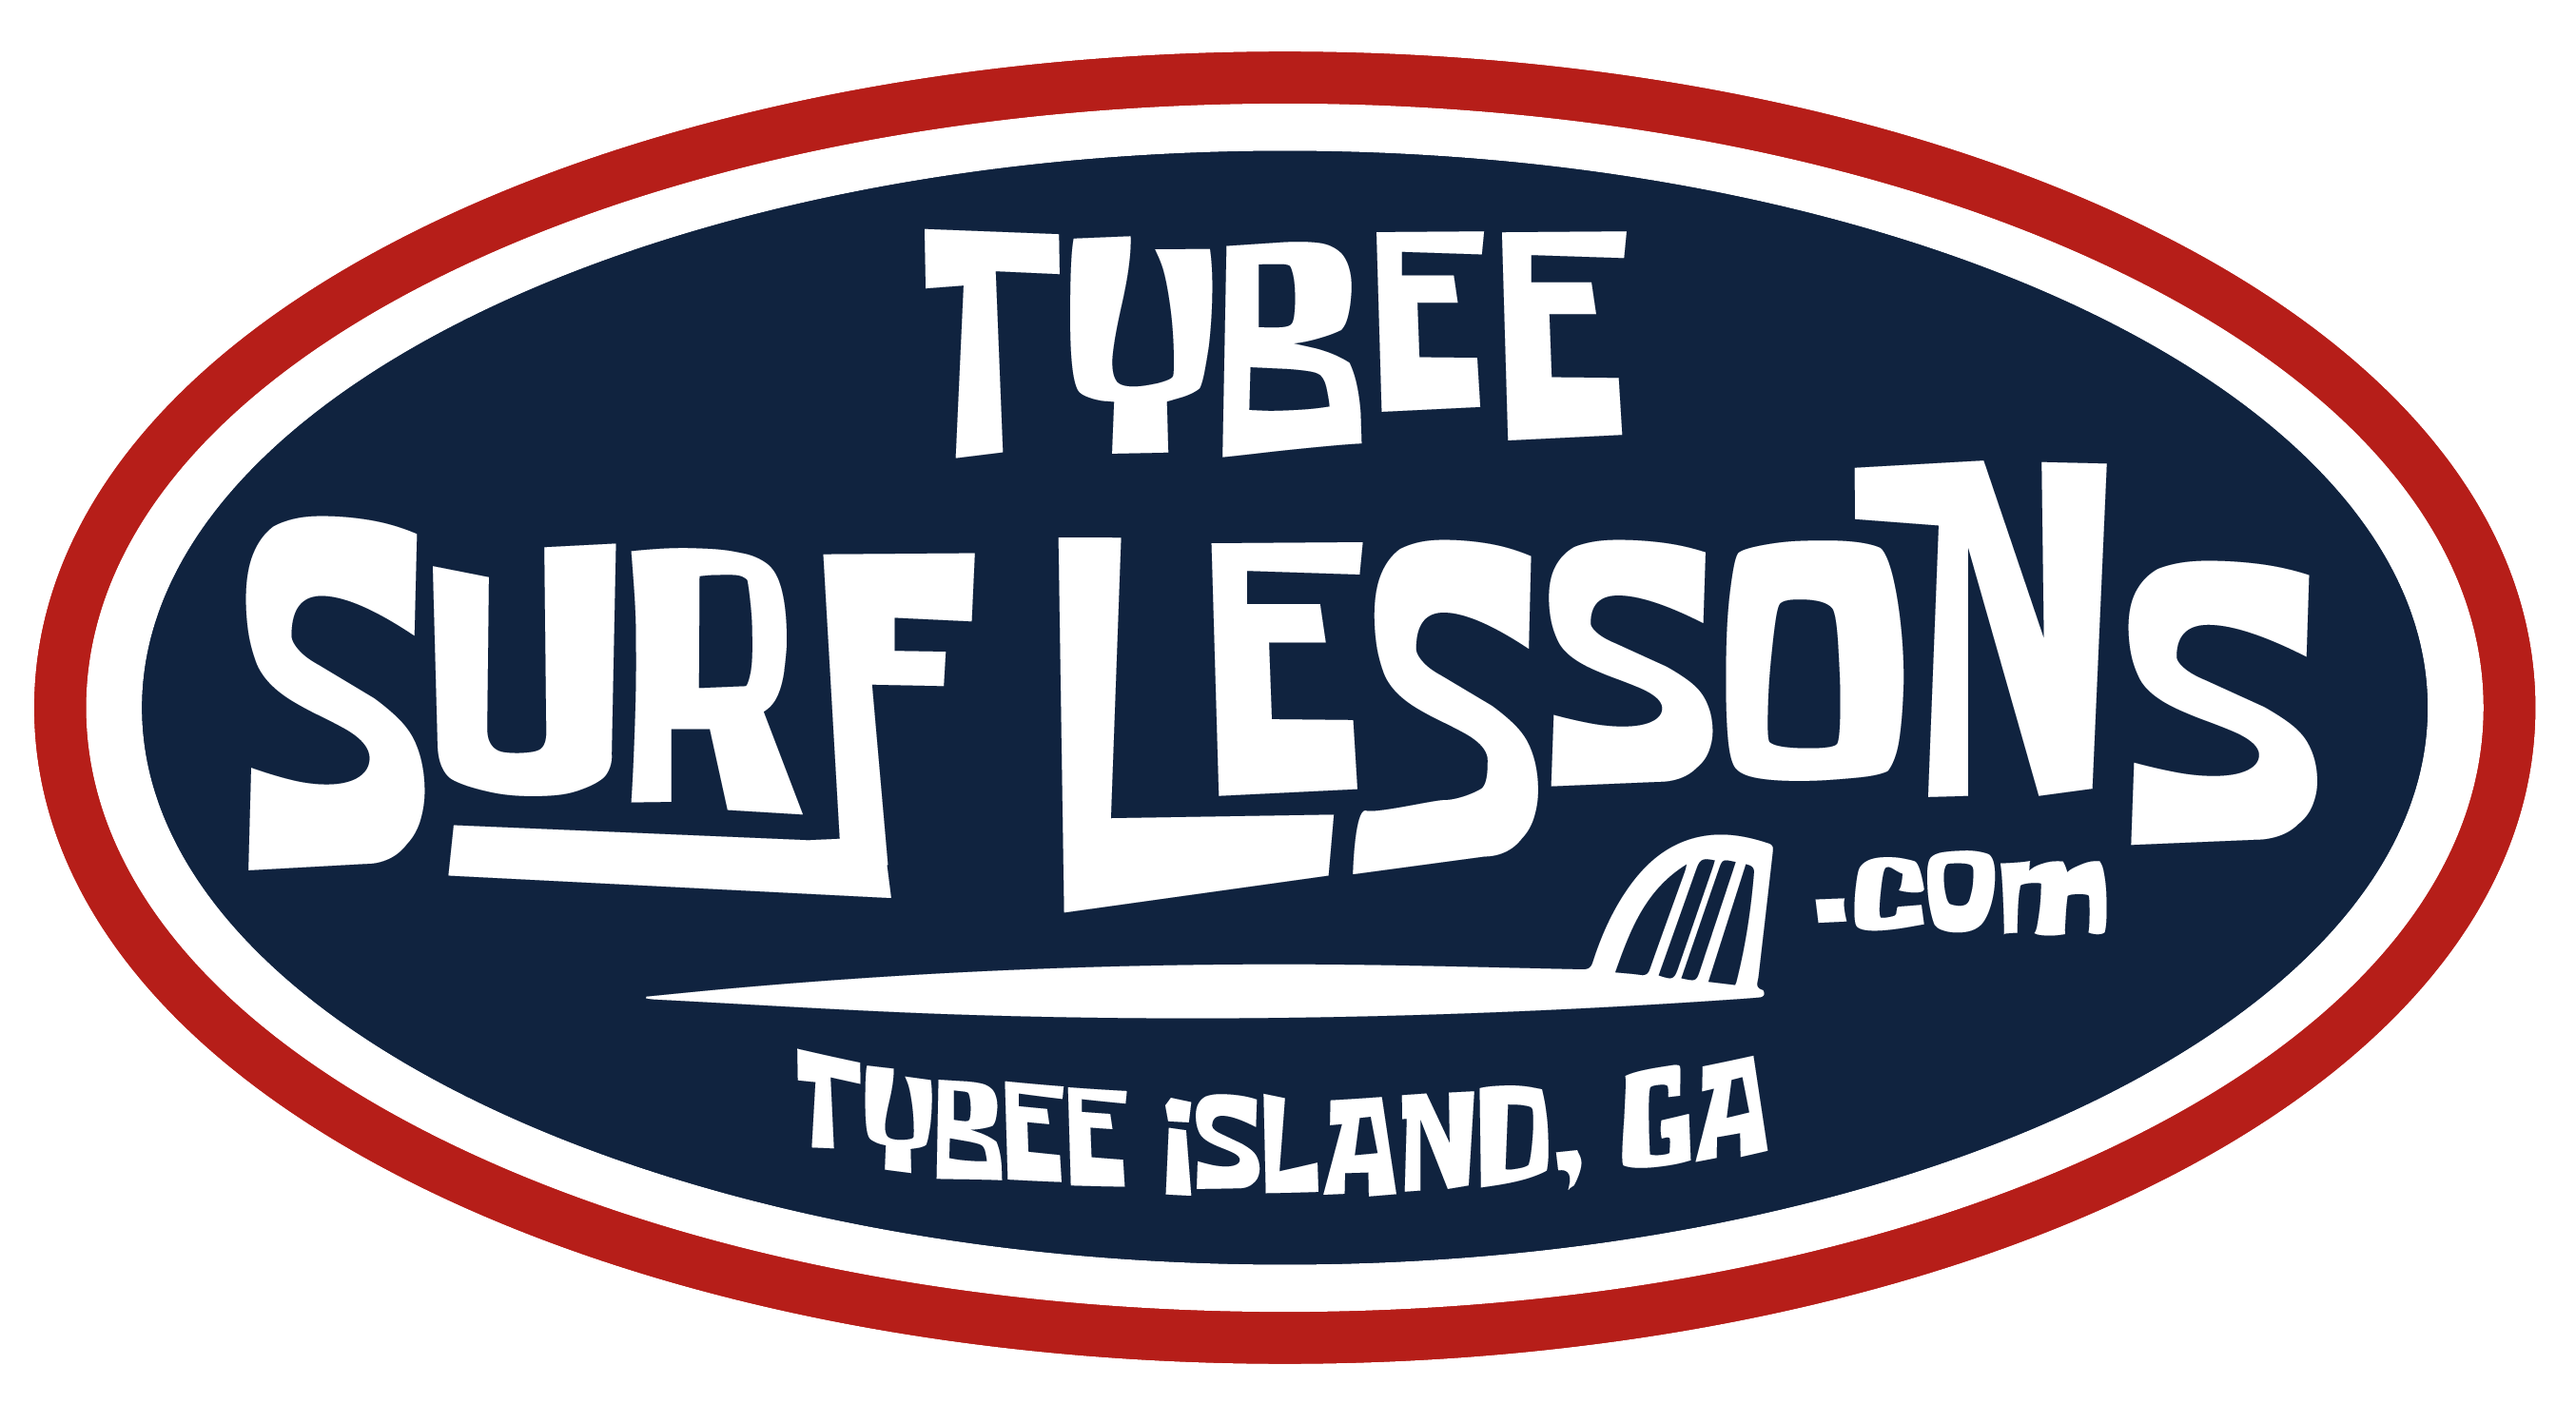 Tybee SurF Lessons